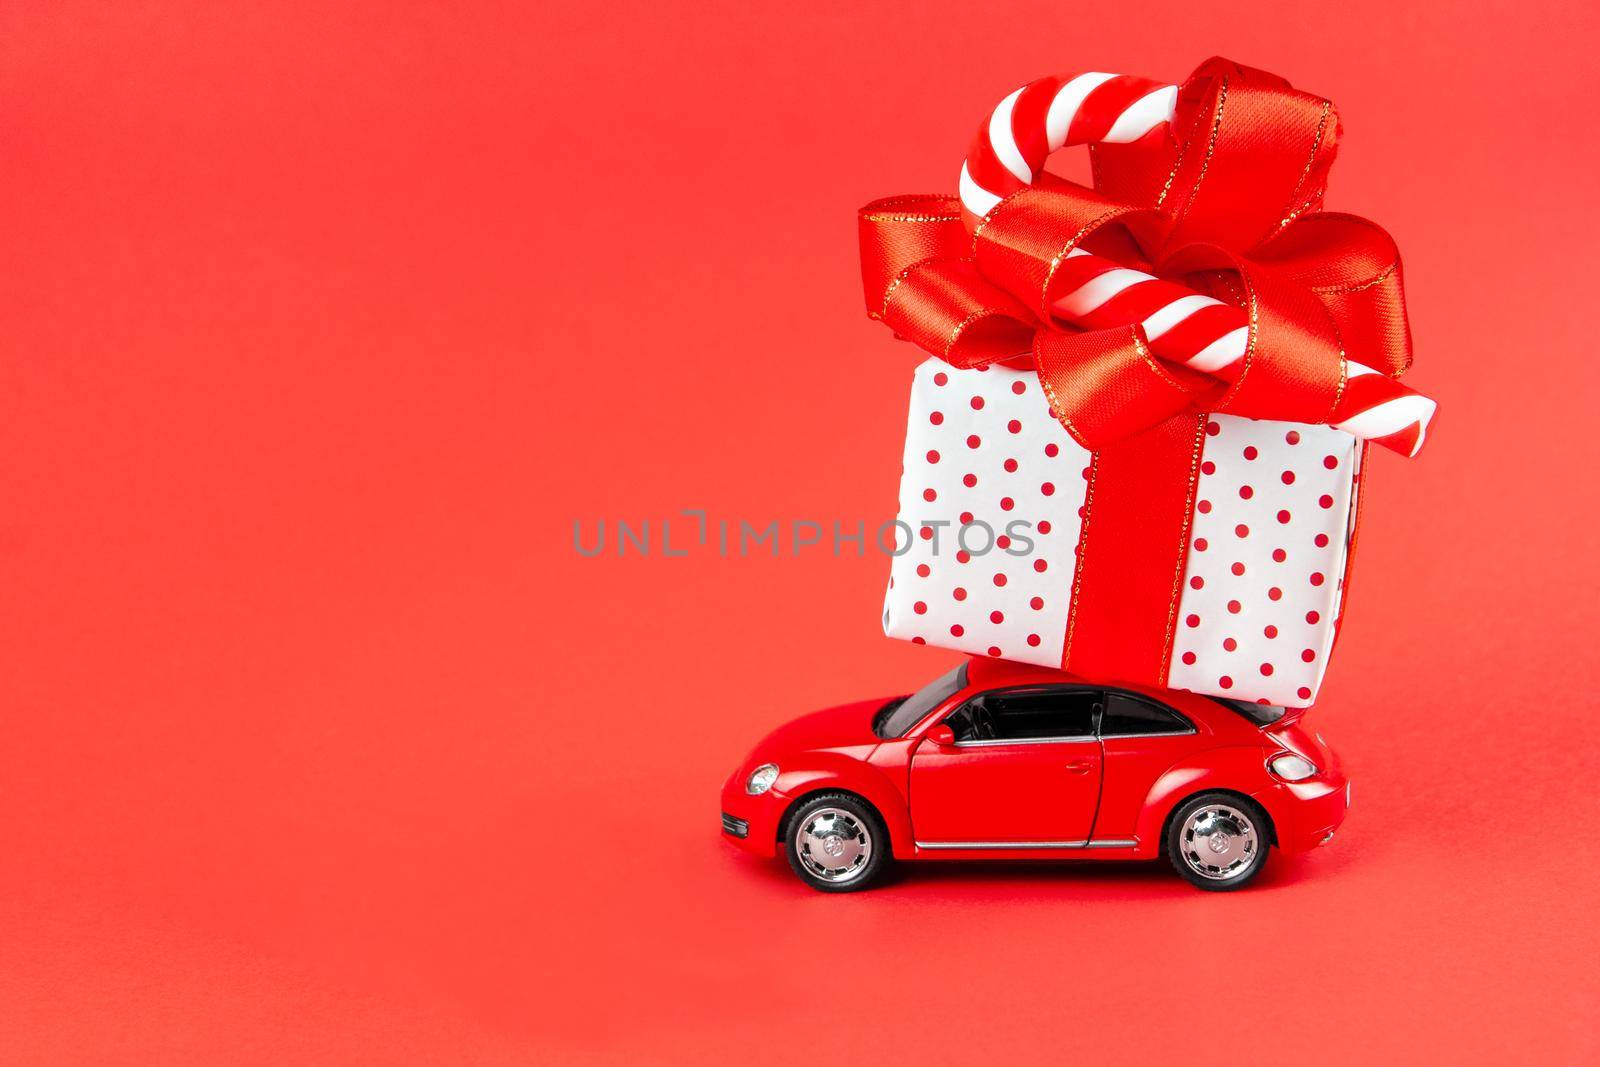 Moscow, Russia, January 14, 2021. Minimal design for celebrating christmas or new year greeting card. Gift delivery concept. Little red toy car with gift and candy on a red background by chelmicky